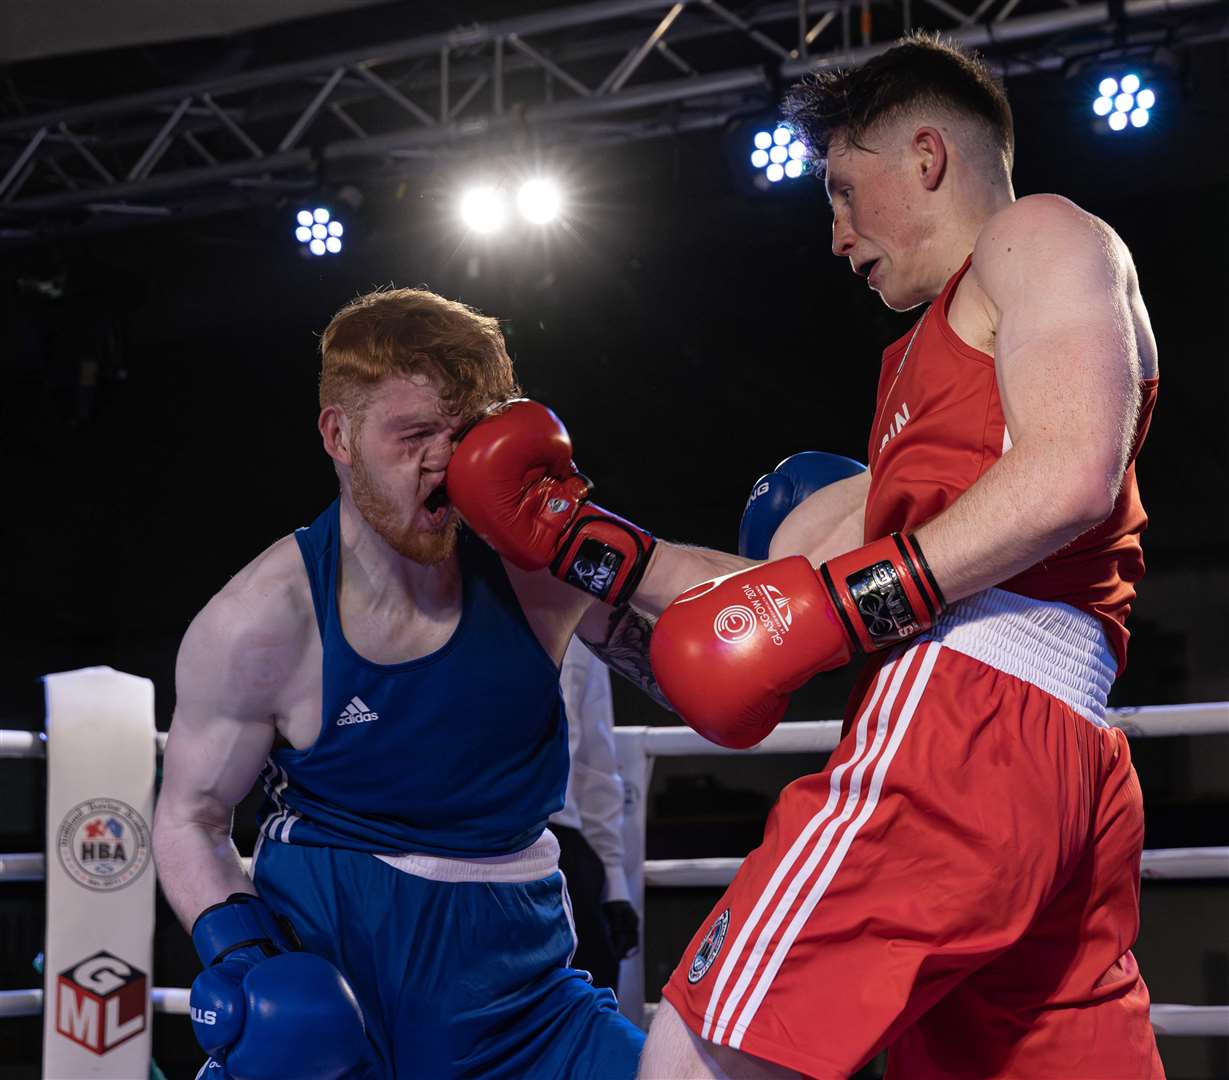 Highland Boxing Academy's Johua Morrison landing a clean uppercut against opponent Joseph Galloway before his unanimous decision victory at the club's home show. Picture: David Rothnie